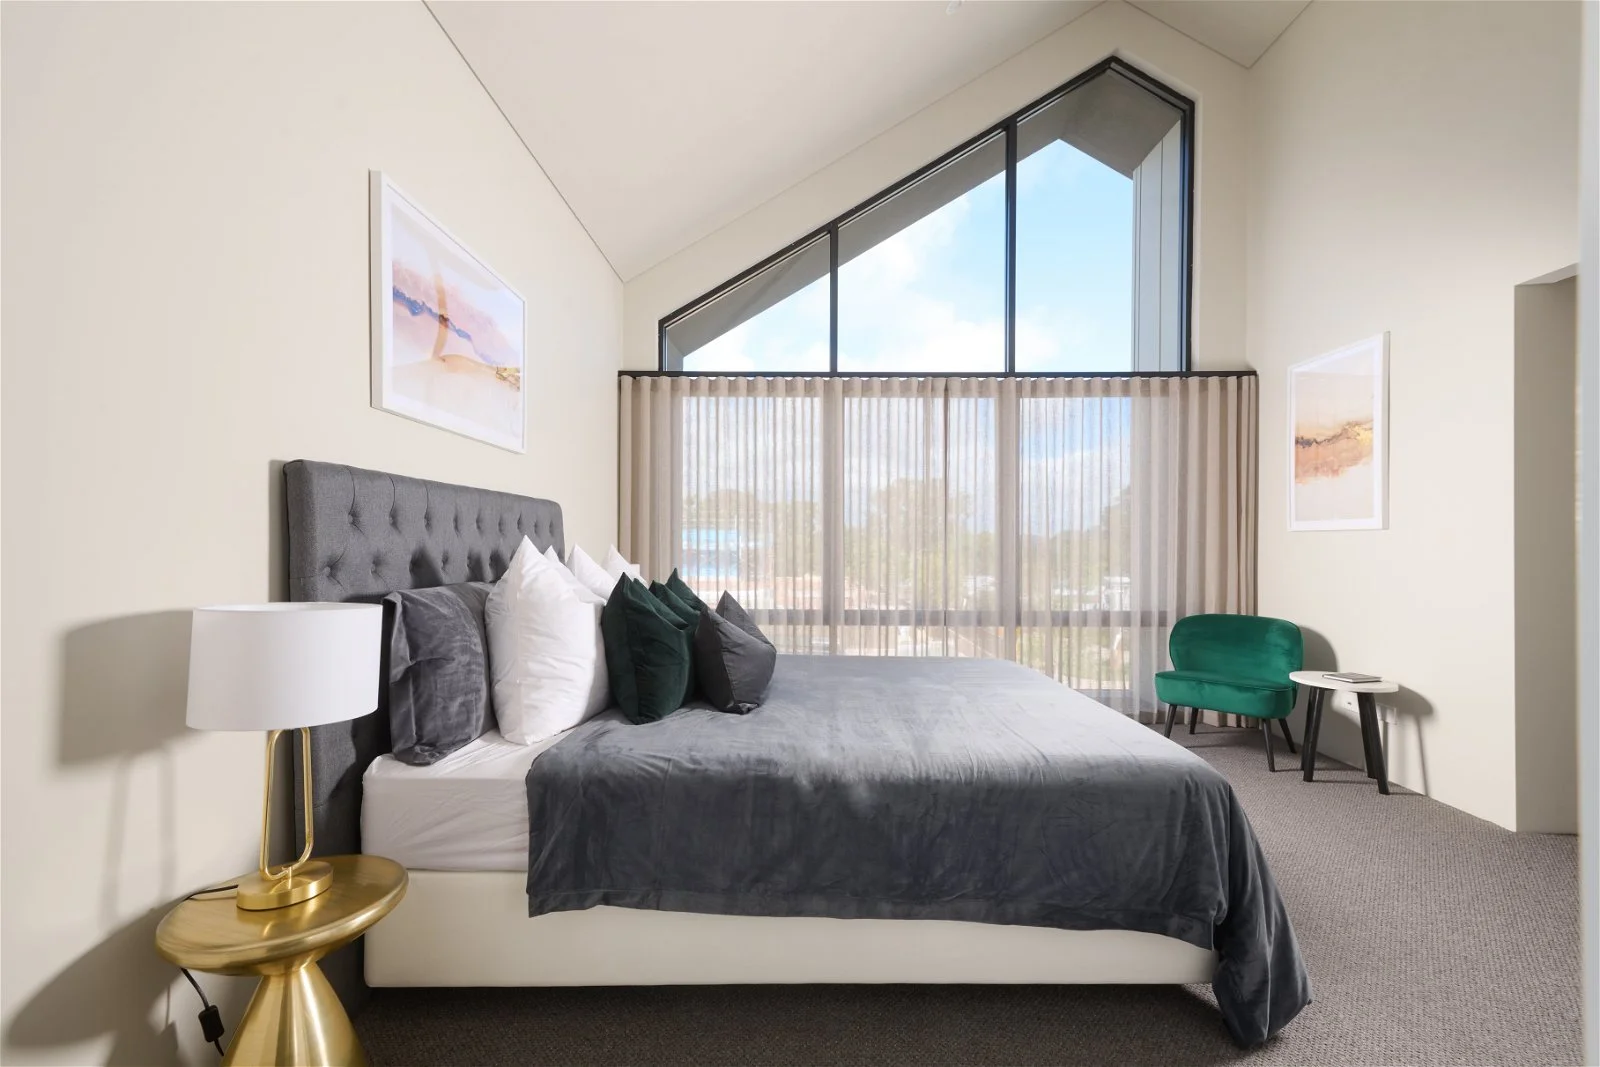 The upstairs master bedroom of a two-storey home containing a large window with a view and bedroom furniture including king sized bed.